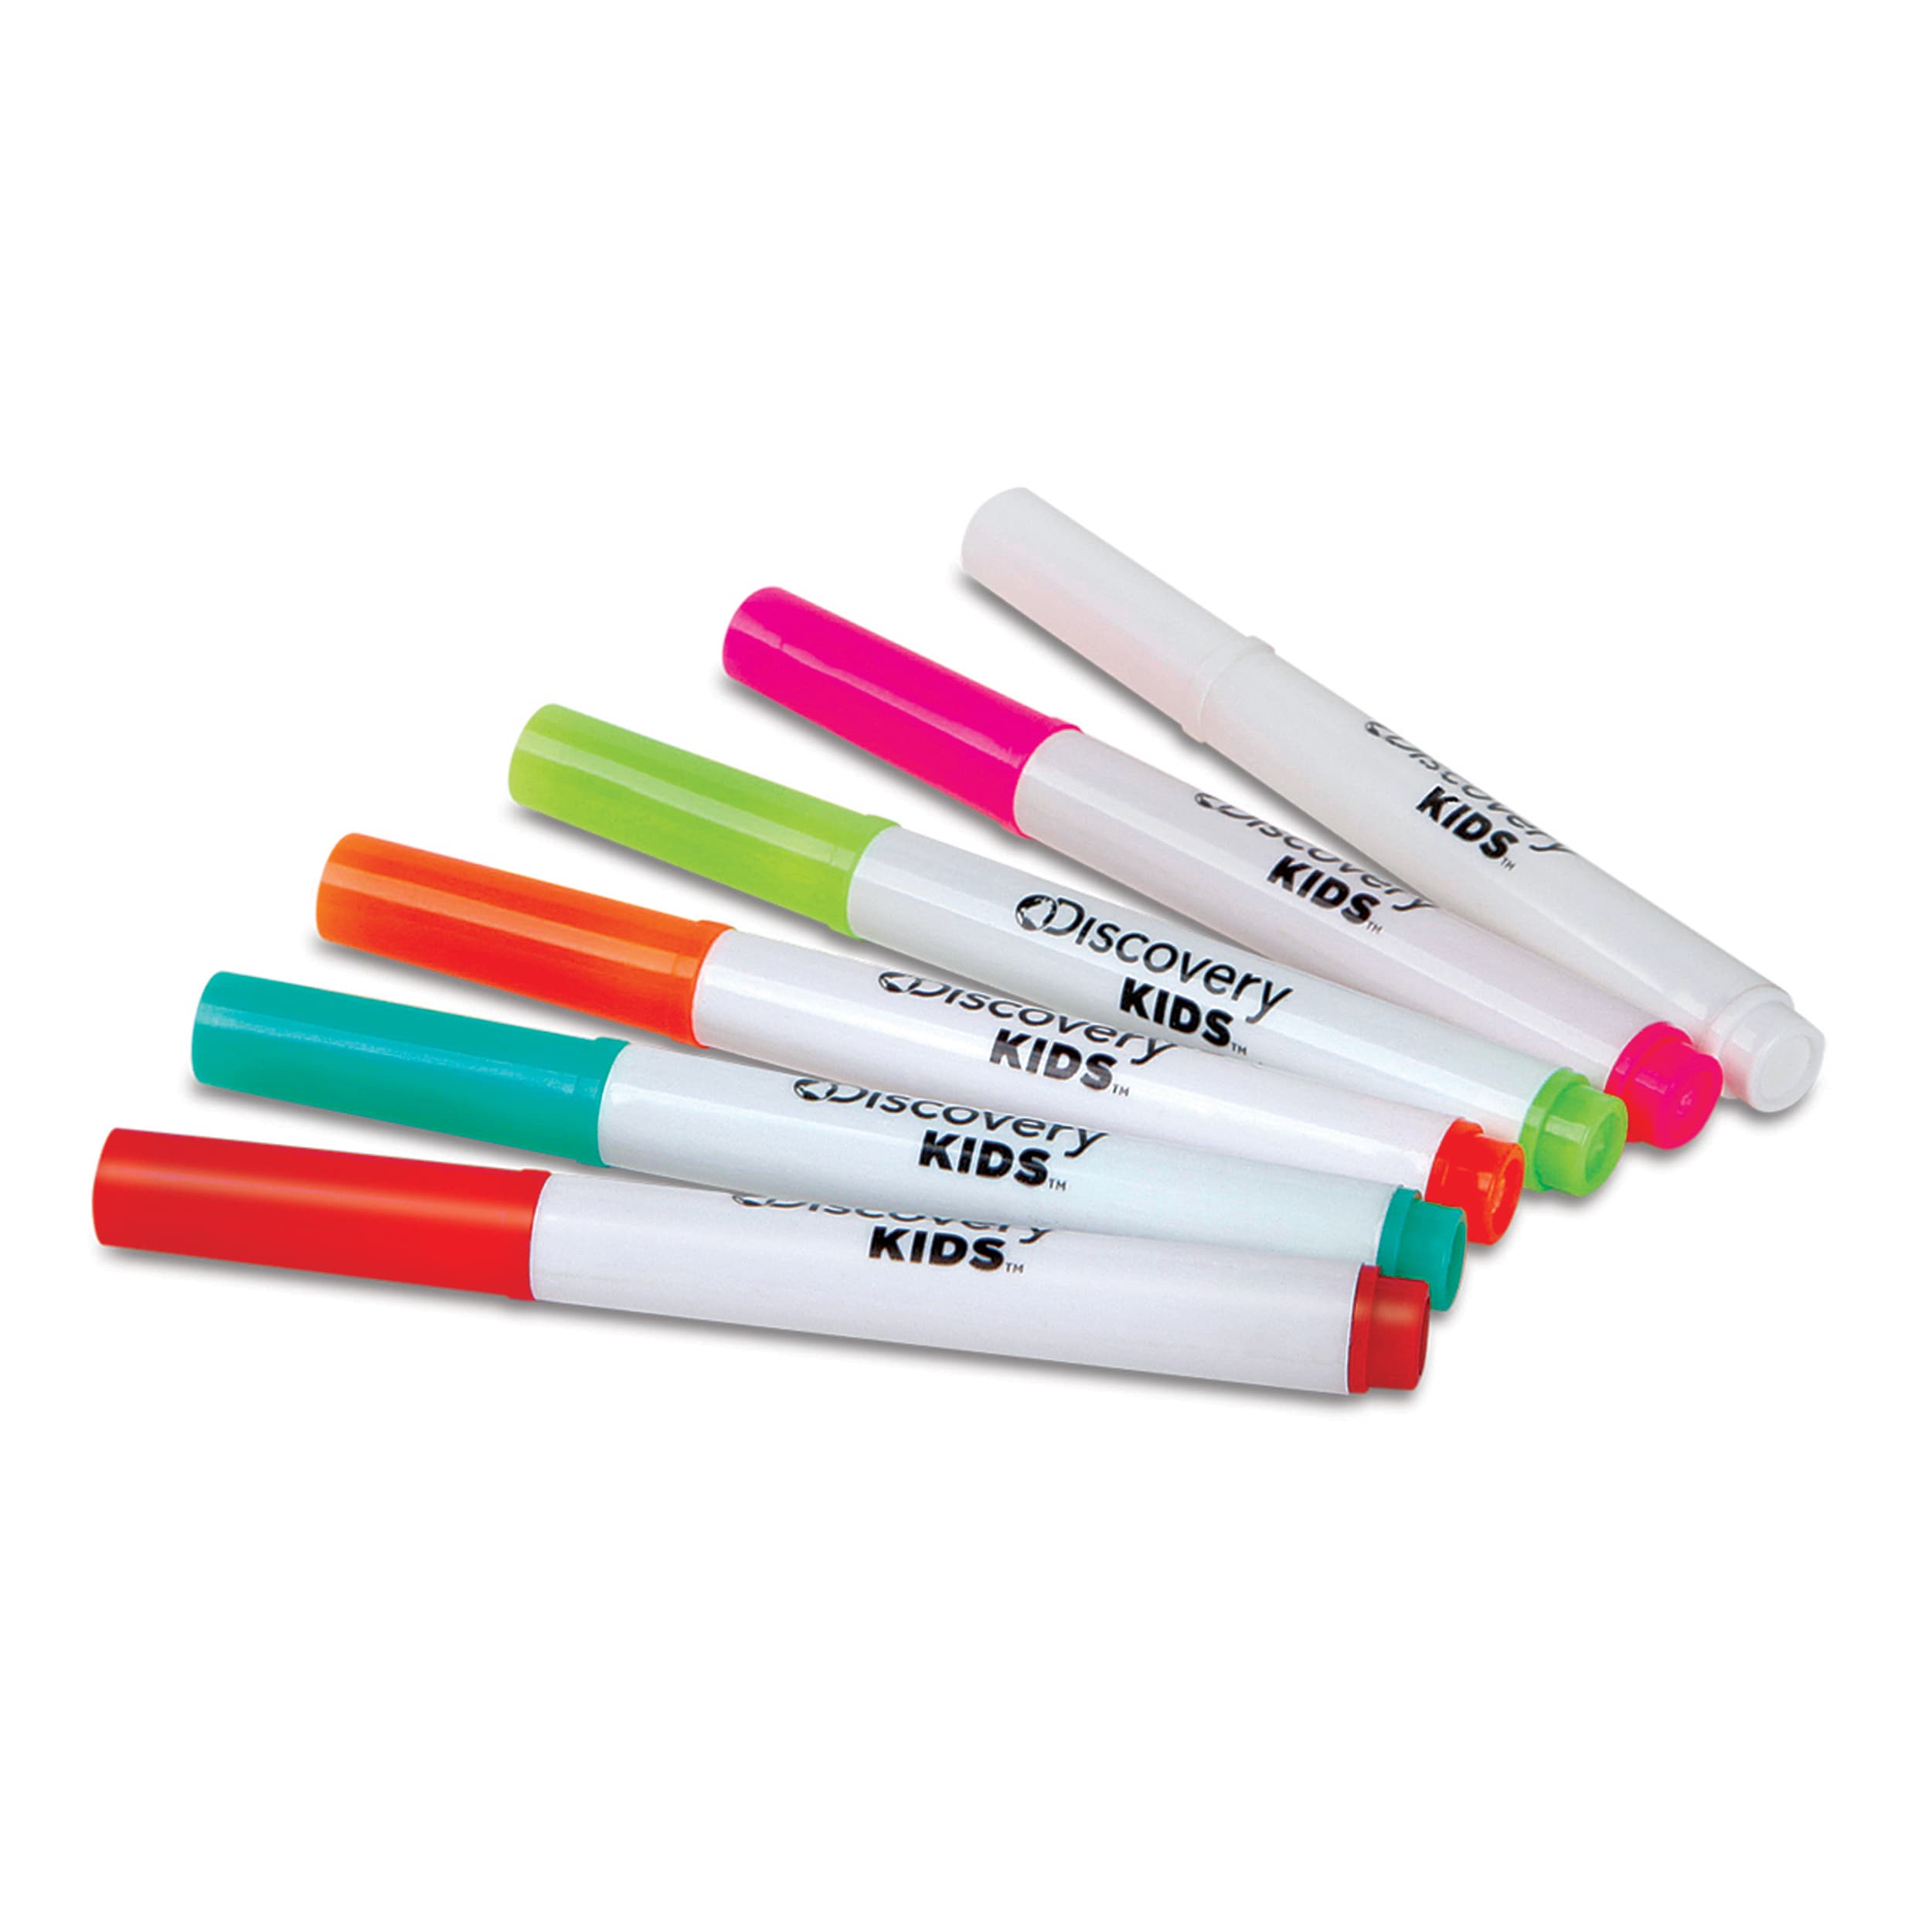 DISCOVERY KIDS DRAWING Easel with Markers ~ Neon Glow ~ Create Glowing Art!  $45.29 - PicClick